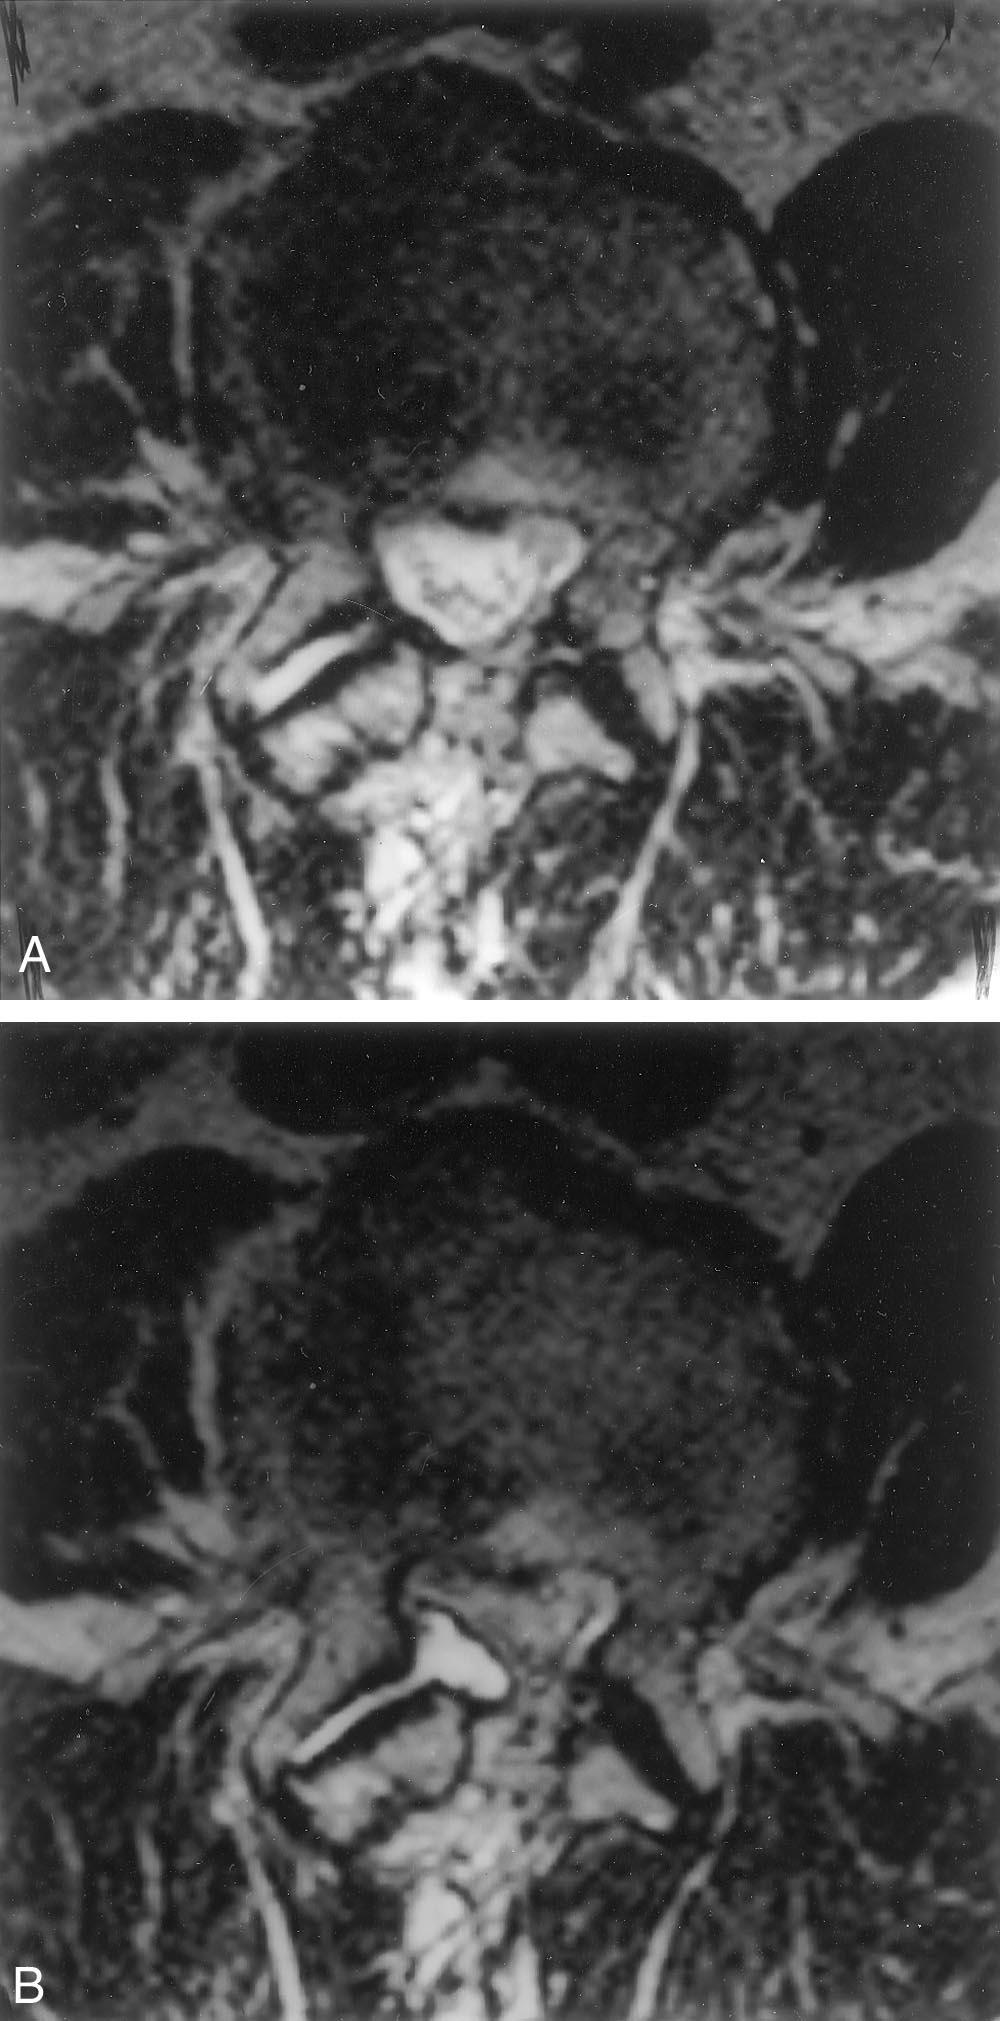 The cross-sectional area of the dural sac in disc level decreased significantly to an indisputable stenosis from (A) relaxed position (PRP) to (B) axially loaded position (ACE).